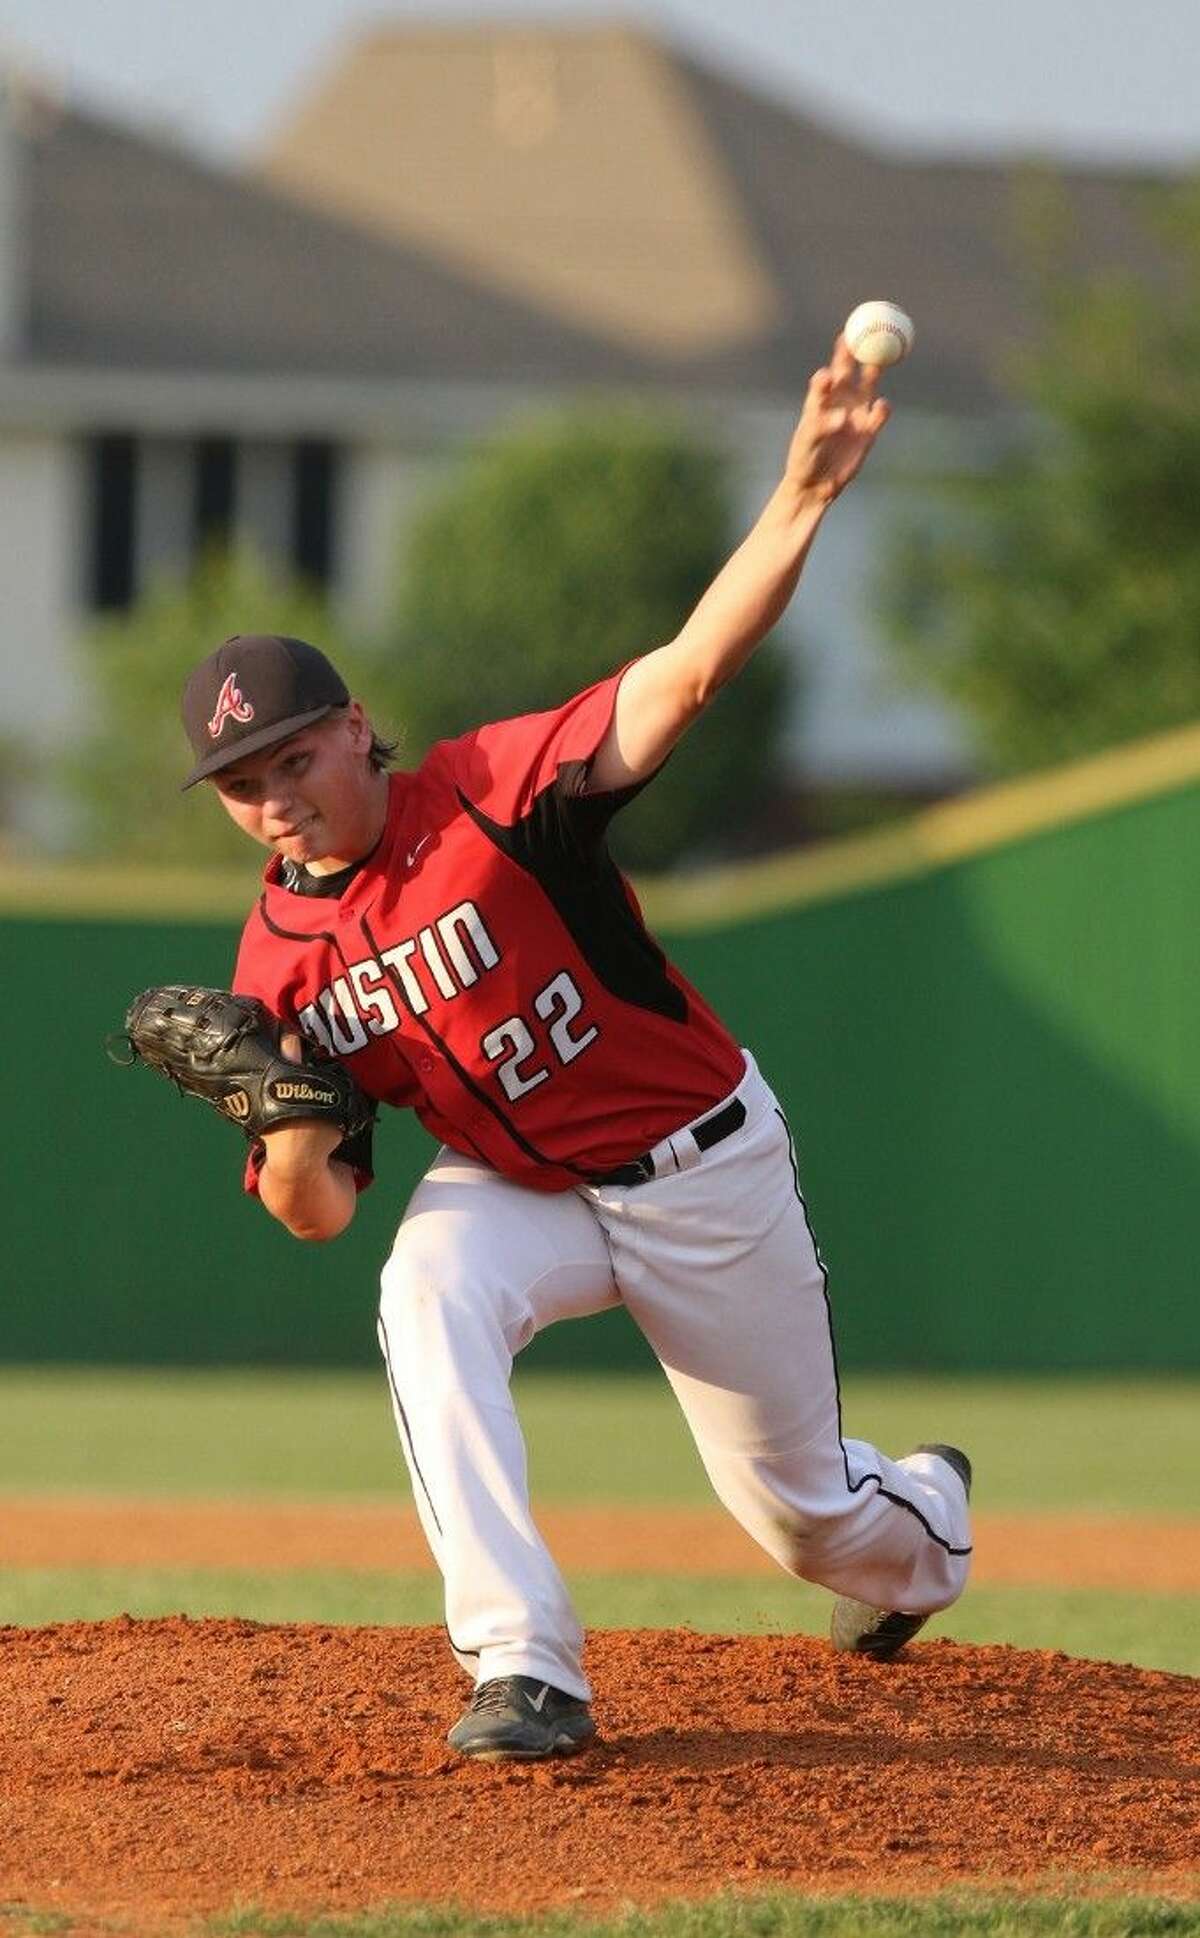 Connor Lepore pitched five shutout innings to help Austin split a District 23-6A series with Dulles last week. The Bulldogs are 8-4 in league play with a one-game lead for fourth place.